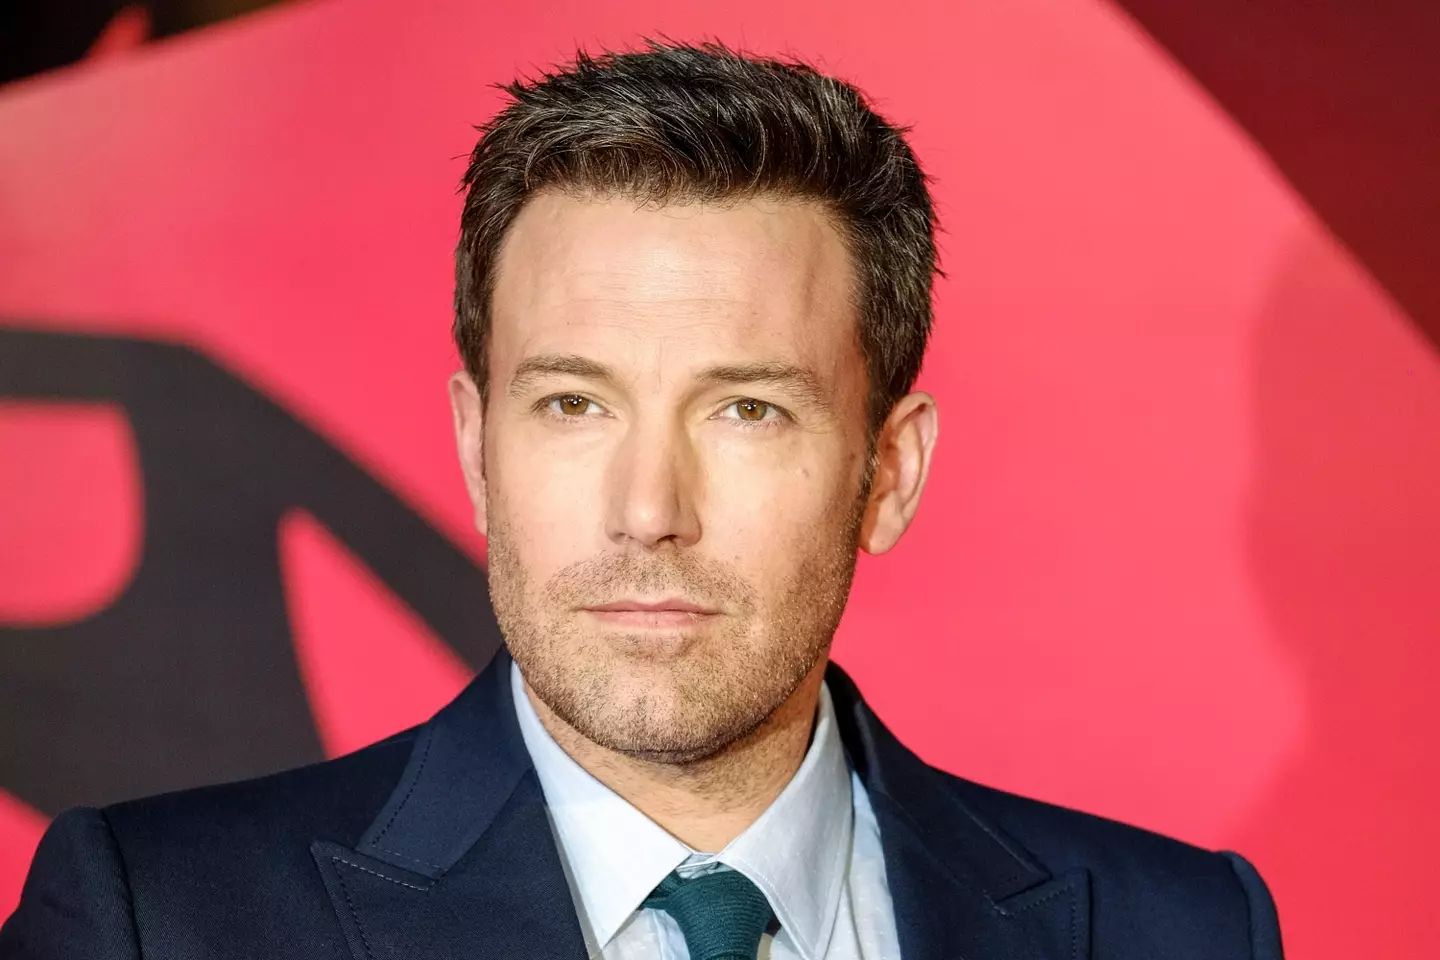 Actor Affleck has candidly spoken about his first marriage.